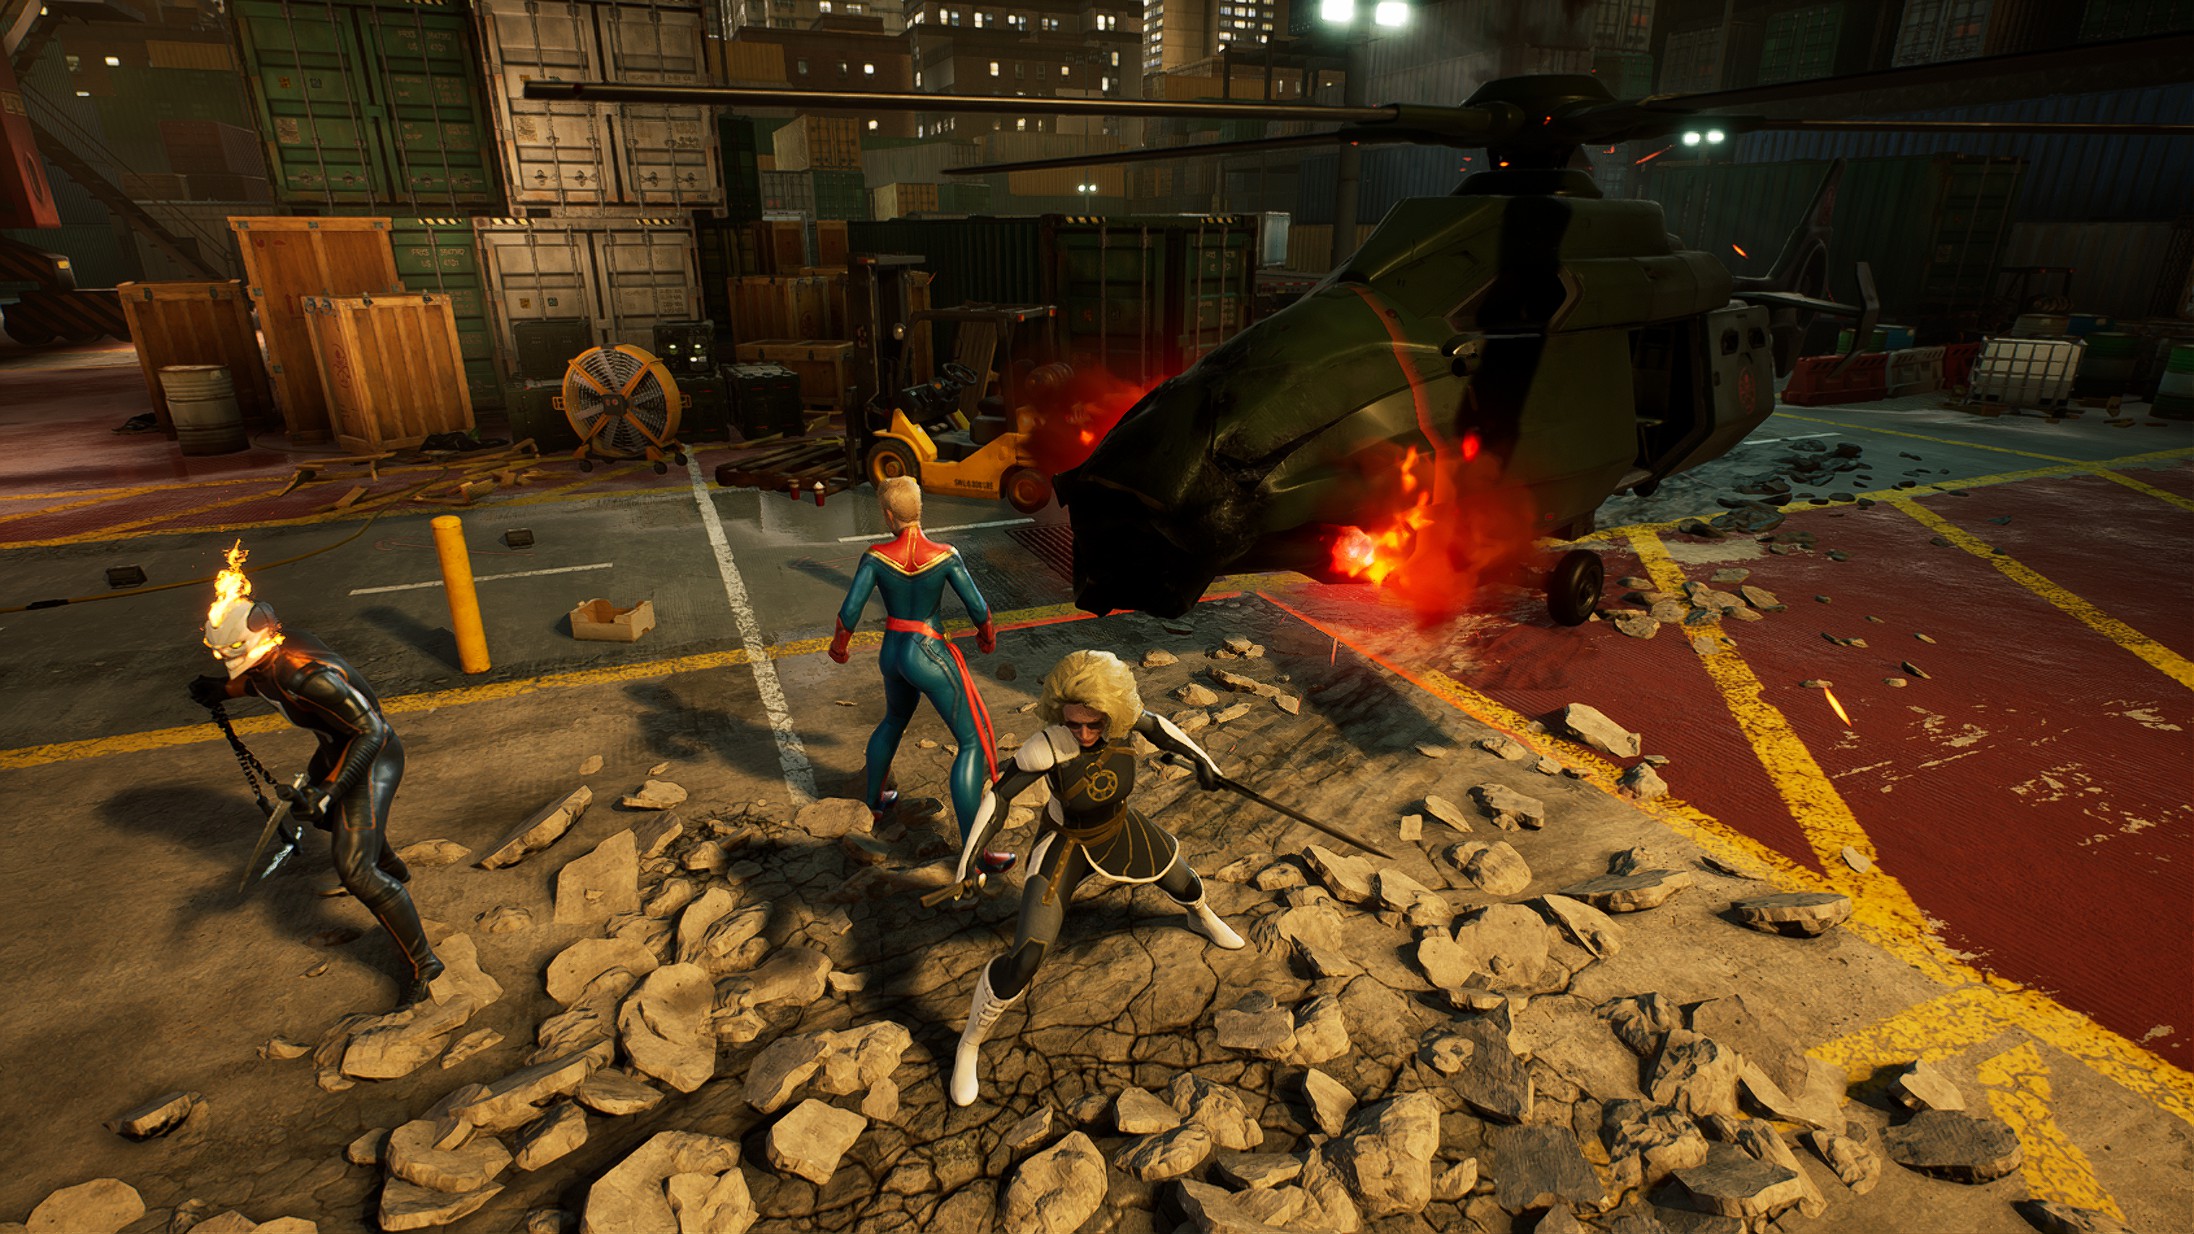 Marvel's Midnight Suns reveal trailer shows tactics-heavy RPG video game